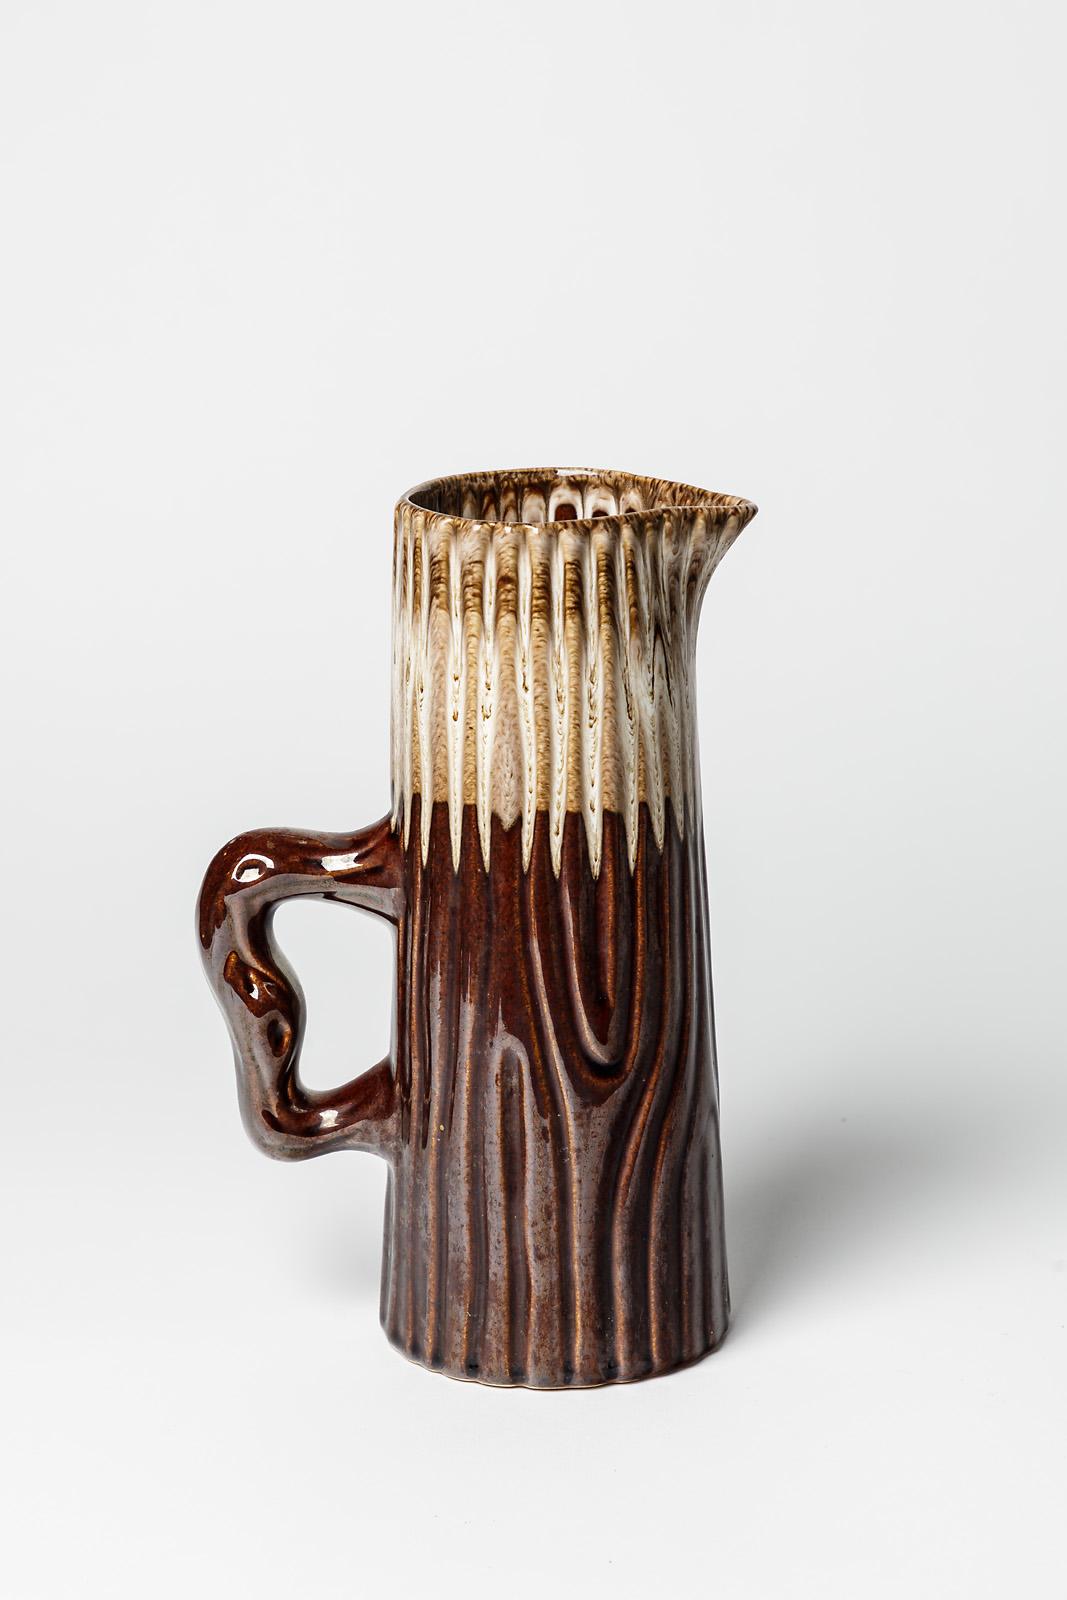 In the style of Pol Chambost

Original vintage ceramic pitcher wiht brown and white ceramic glazes colors

Imitation wood ceramic pitcher realised circa 1950

Perfect condition

Measures: height : 26 cm Large : 15 cm.